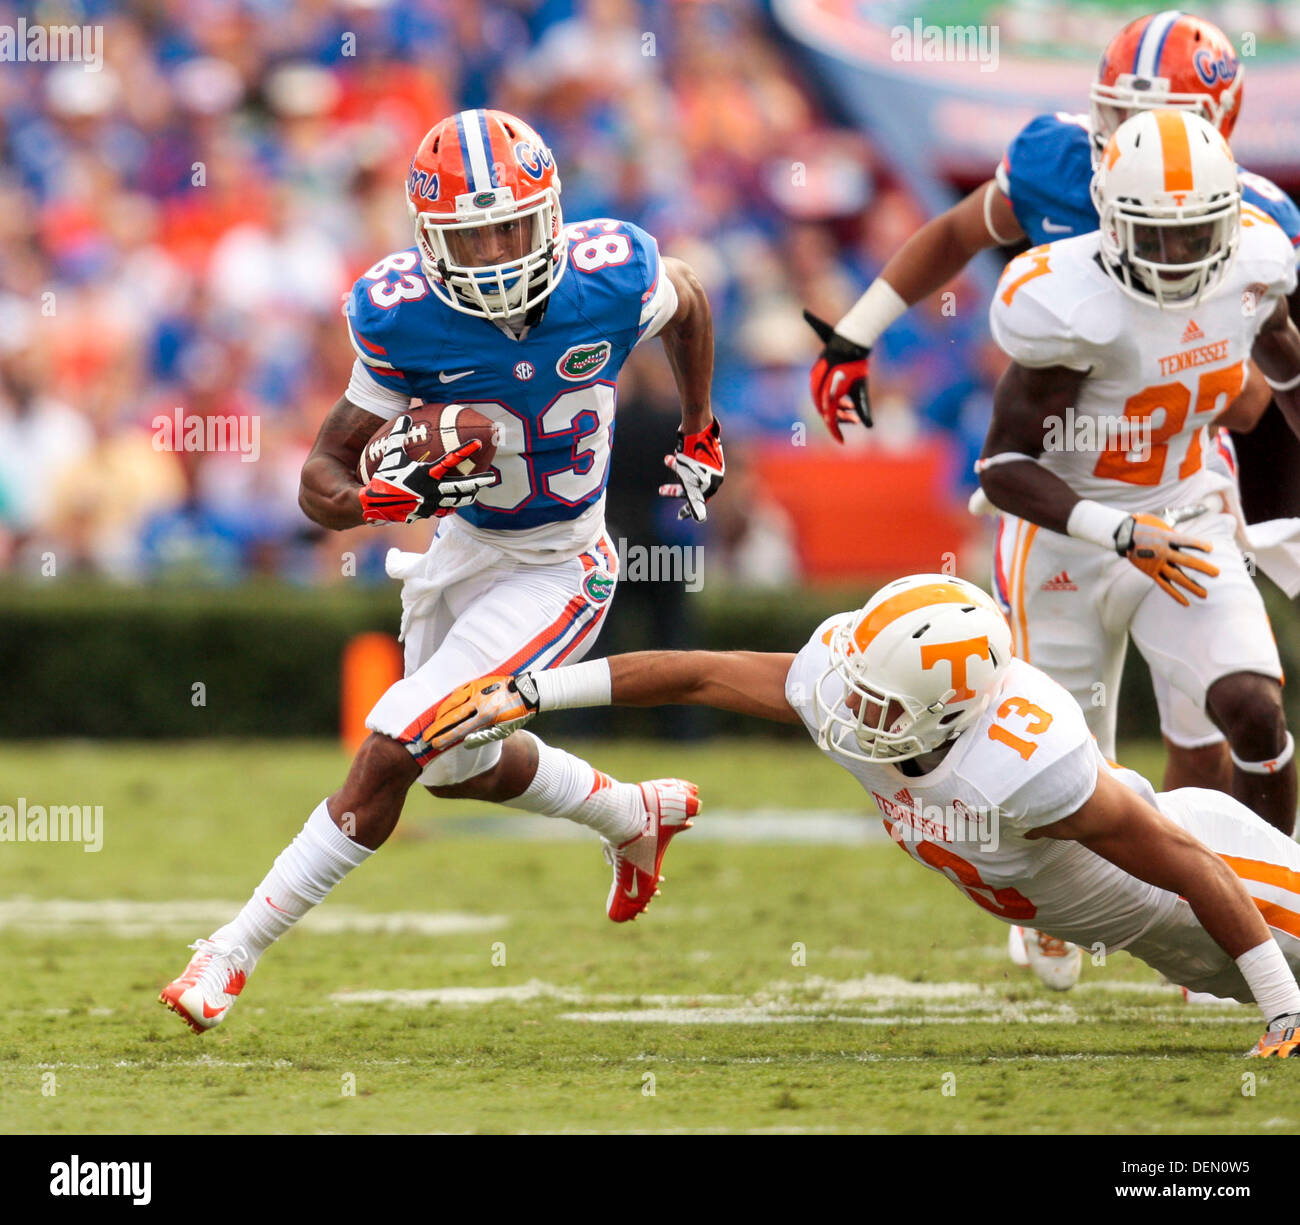 Gainesville, Florida, USA. 21st Sep, 2013. WILL VRAGOVIC | Times.Florida Gators wide receiver Solomon Patton (83) finds running room for a second quarter touchdown during the Florida Gators against the Tennessee Volunteers at Ben Hill Griffin Stadium in Gainesville, Fla. on Saturday, Sept. 21, 2013. Credit:  Will Vragovic/Tampa Bay Times/ZUMAPRESS.com/Alamy Live News Stock Photo